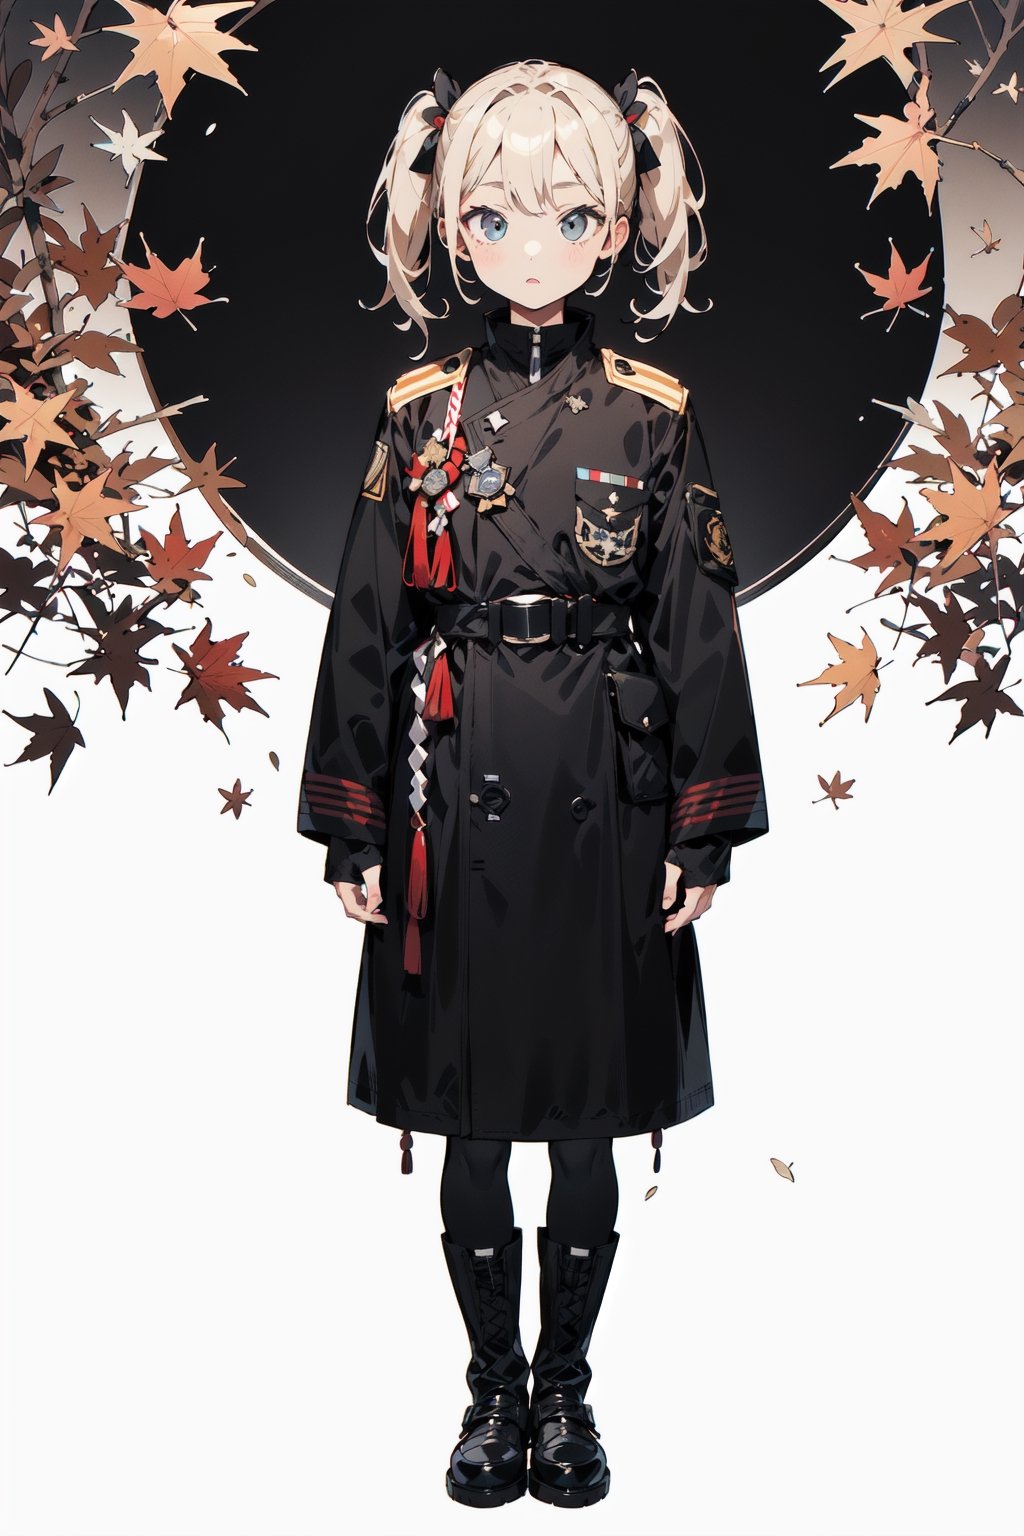 A very young elementary school girl, 10 years old, blond twin-tailed hair, dressed in the officer's uniform of the former Japanese Navy, with the rank of naval general and numerous decorations attached. She wears a military black coat, black military boots, 
I'm stunned by the empty space.
A crisp, clear autumn morning
